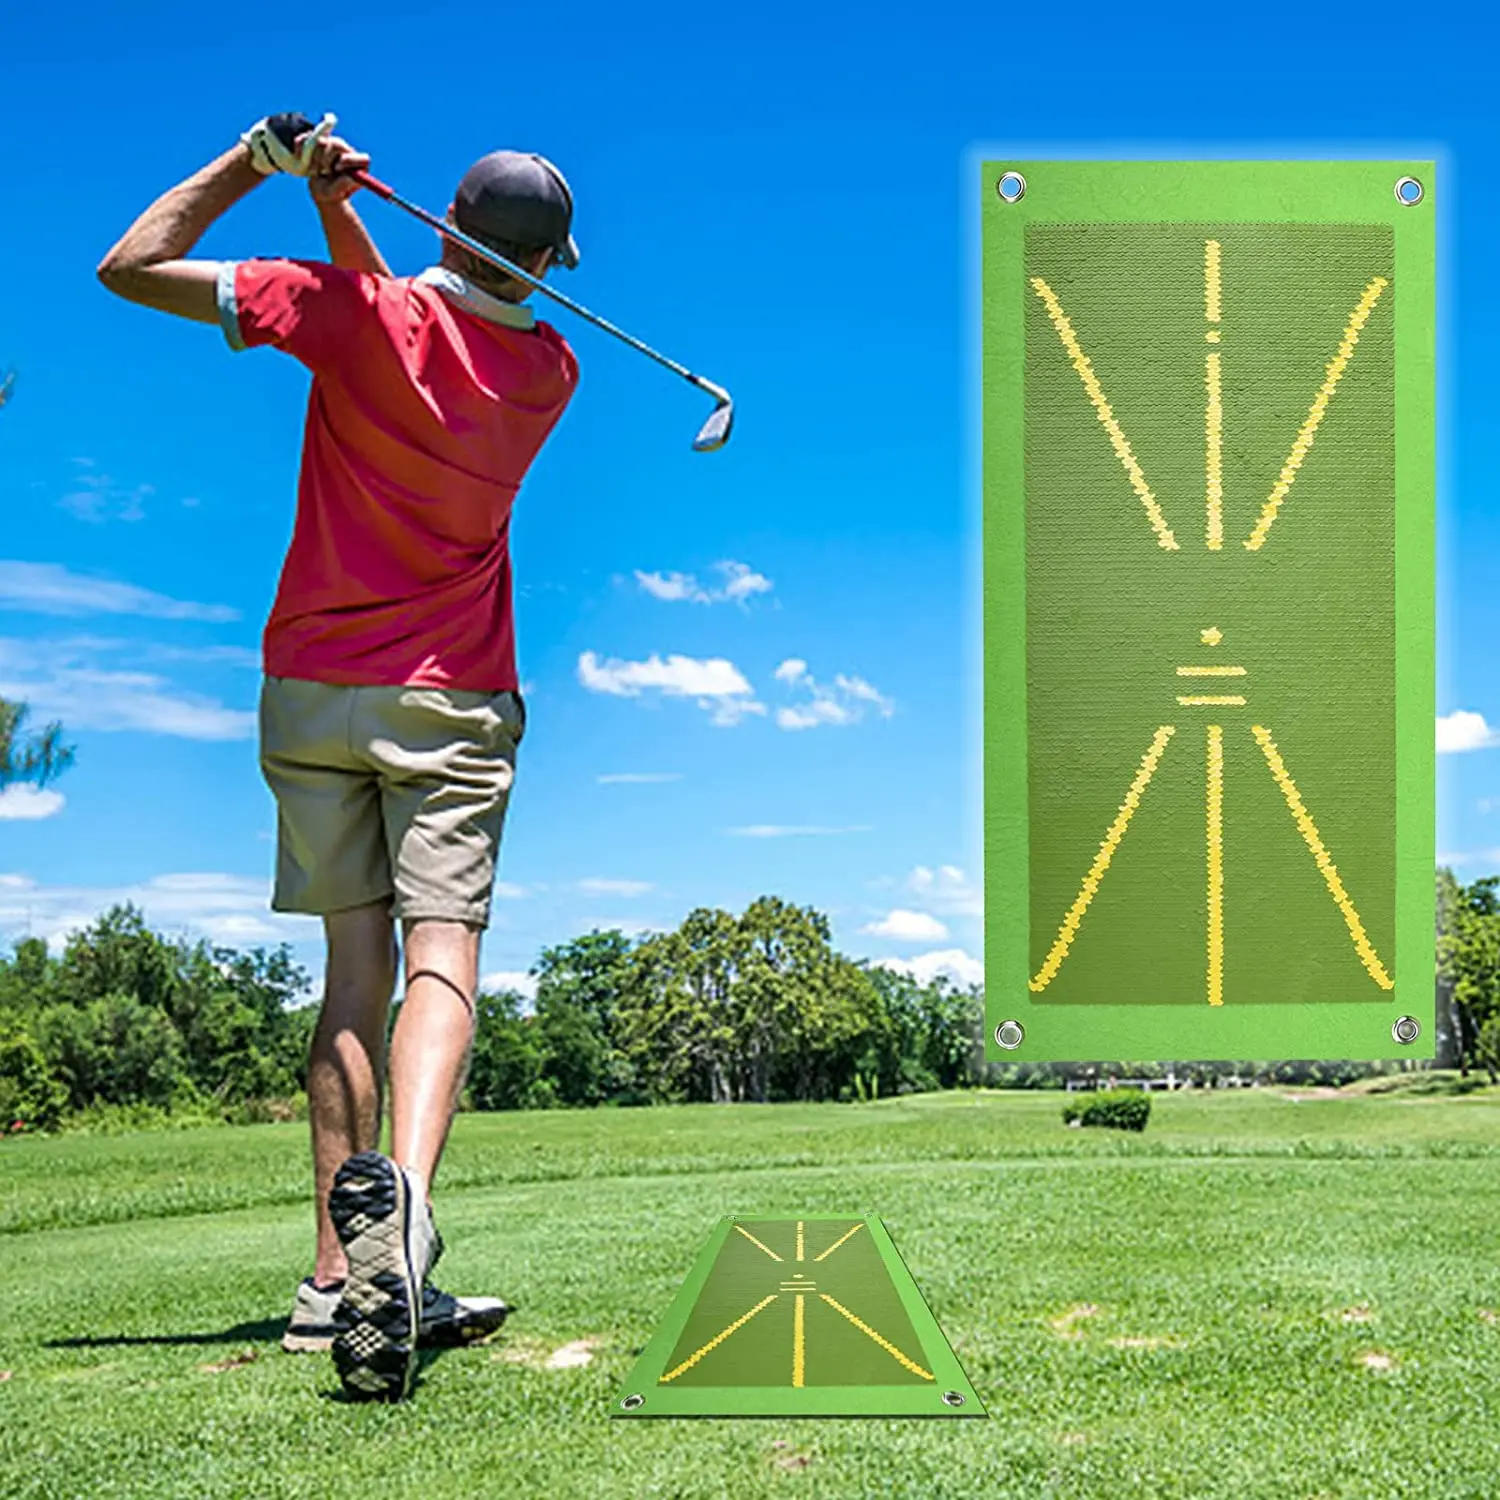 

Golf Swing Track Practice Marking Pad Batting Trajectory Direction Detection Analysis Pad Training Mat for Swing Detection